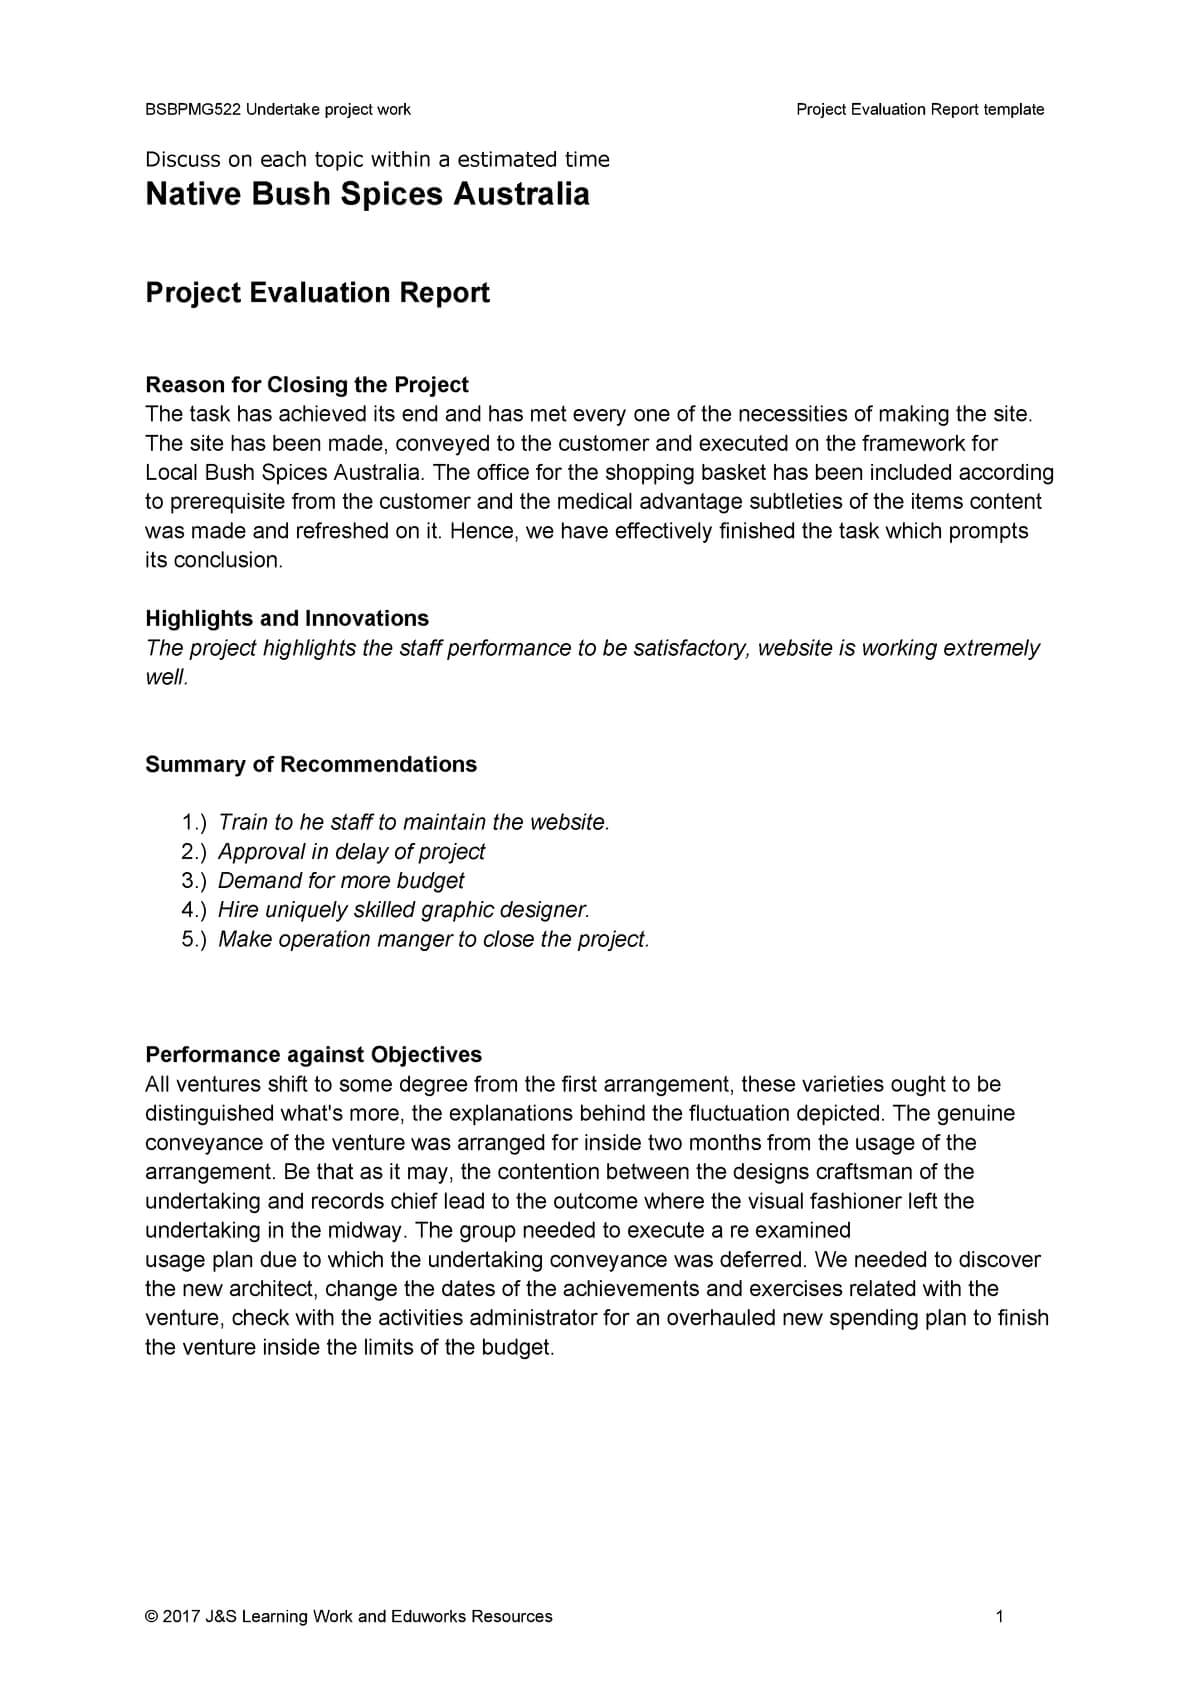 Project Evaluation Report Template V1.0 – 200392 – Uws – Studocu Inside Website Evaluation Report Template